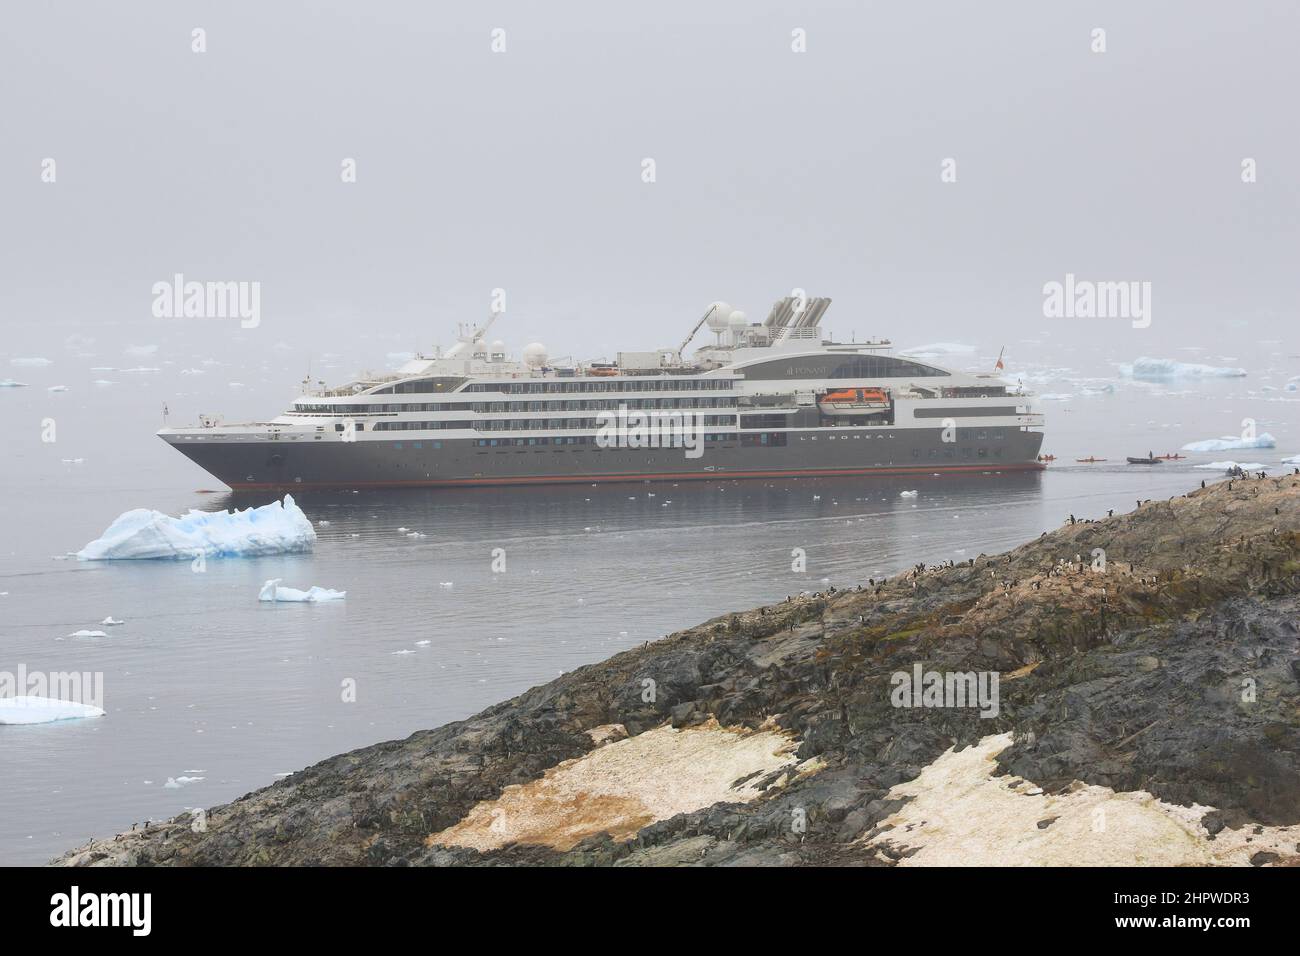 Gentoo penguin colony on Cuverville Island, Antarctica, with Le Boreal cruise ship in the background. Stock Photo